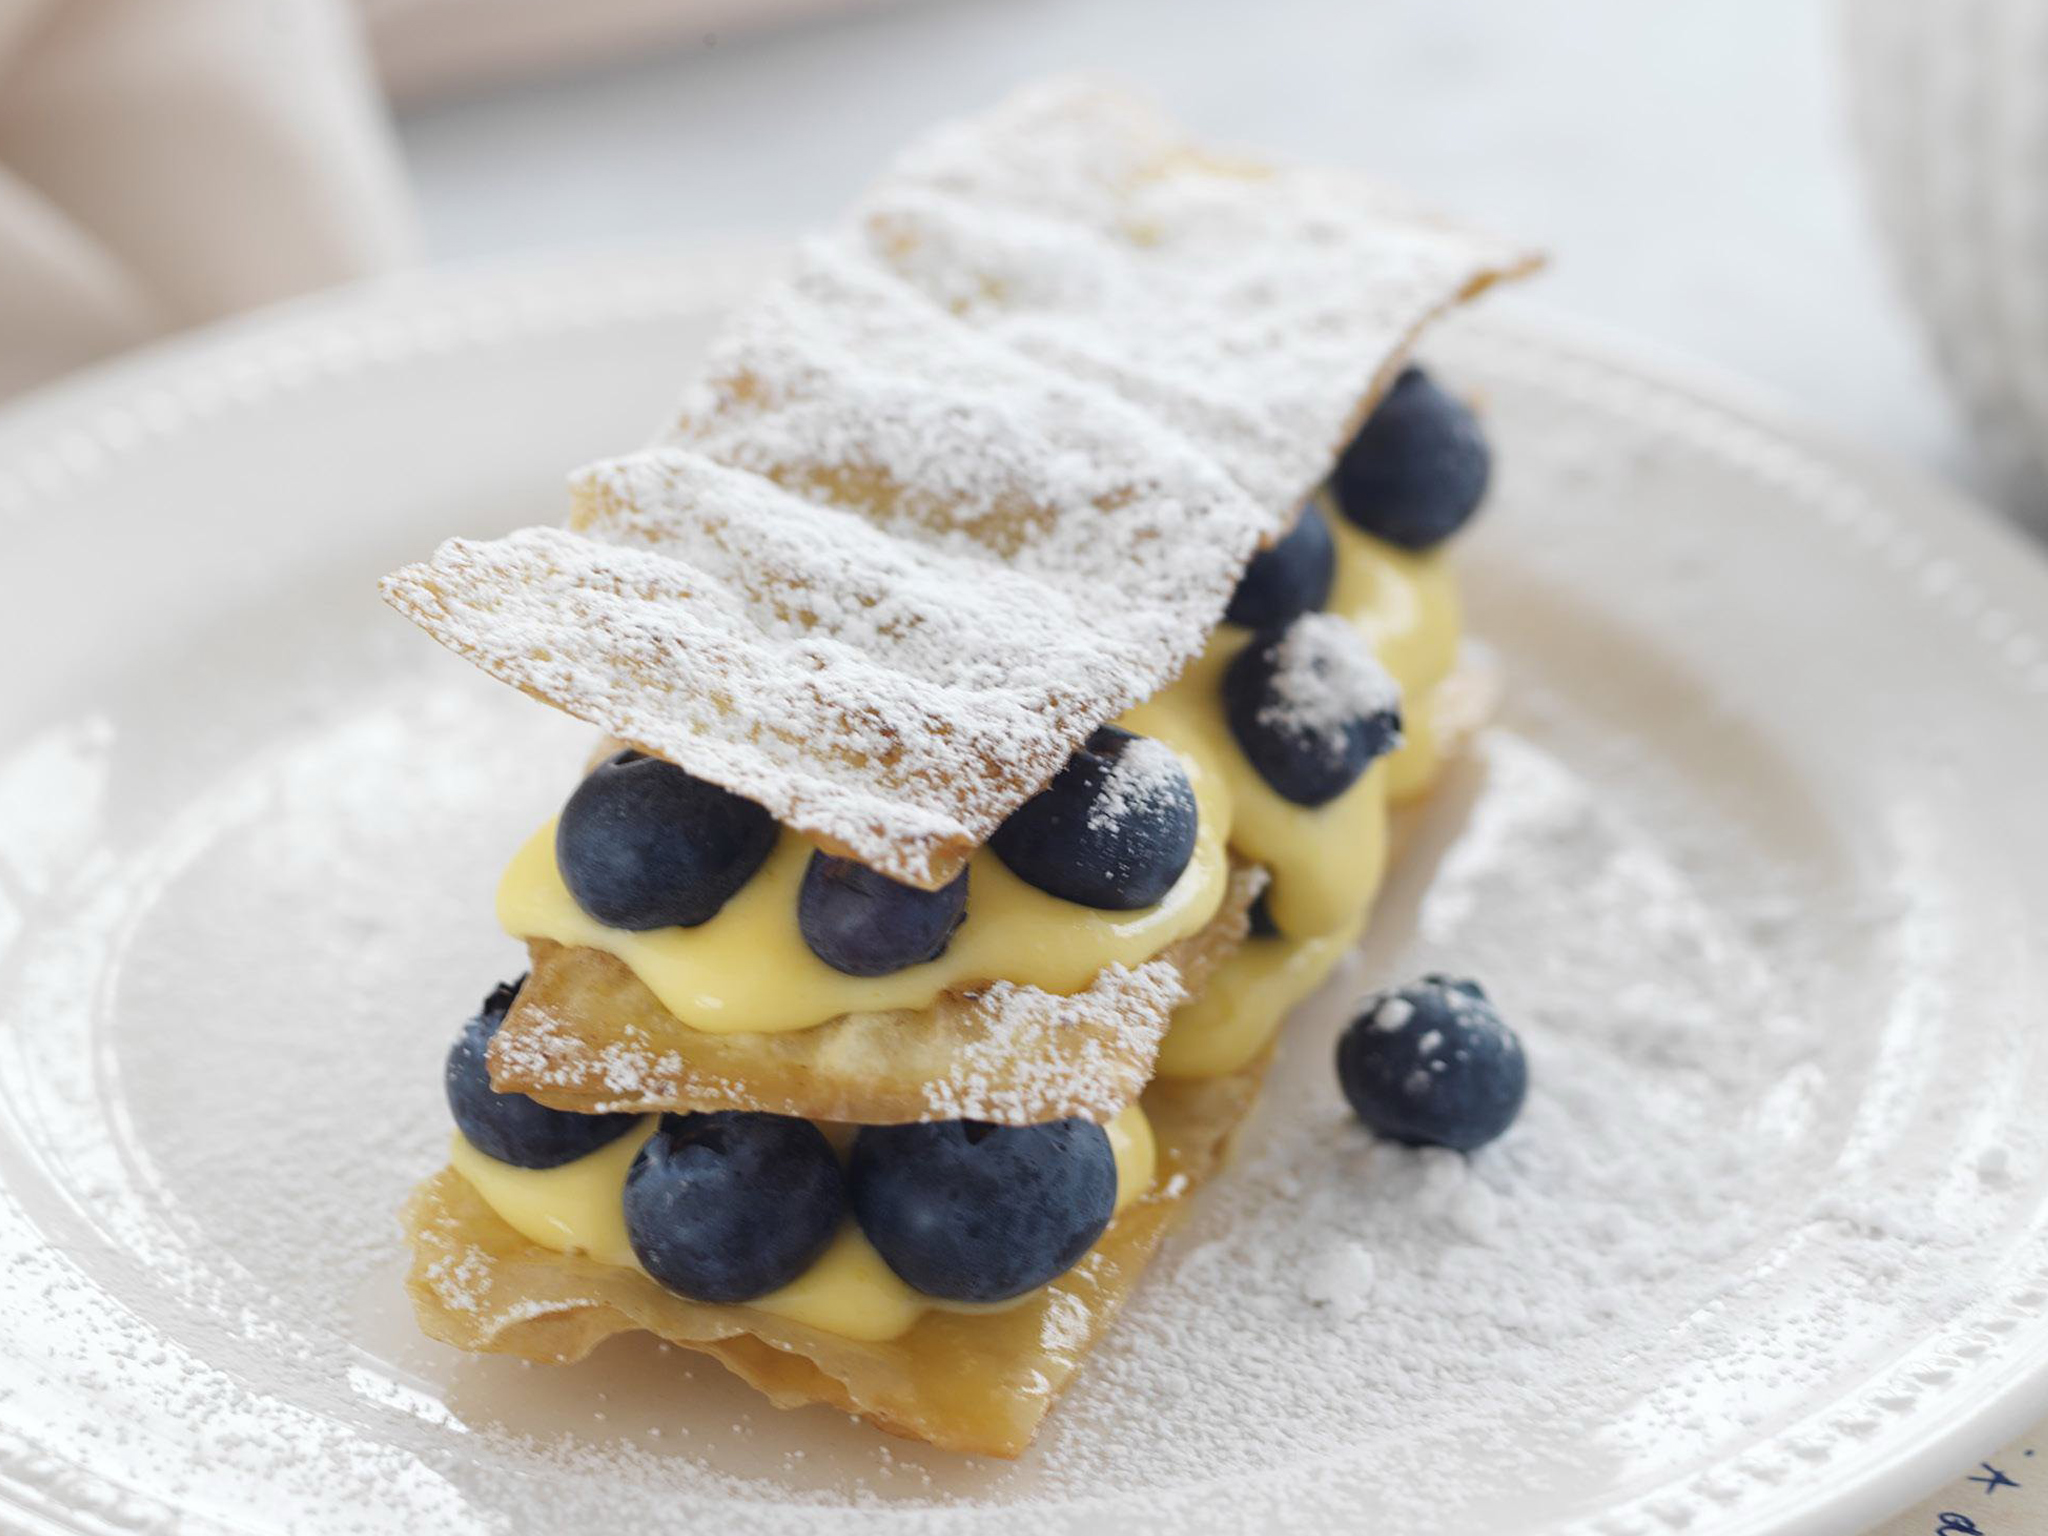 lemon curd and blueberry mille feuille